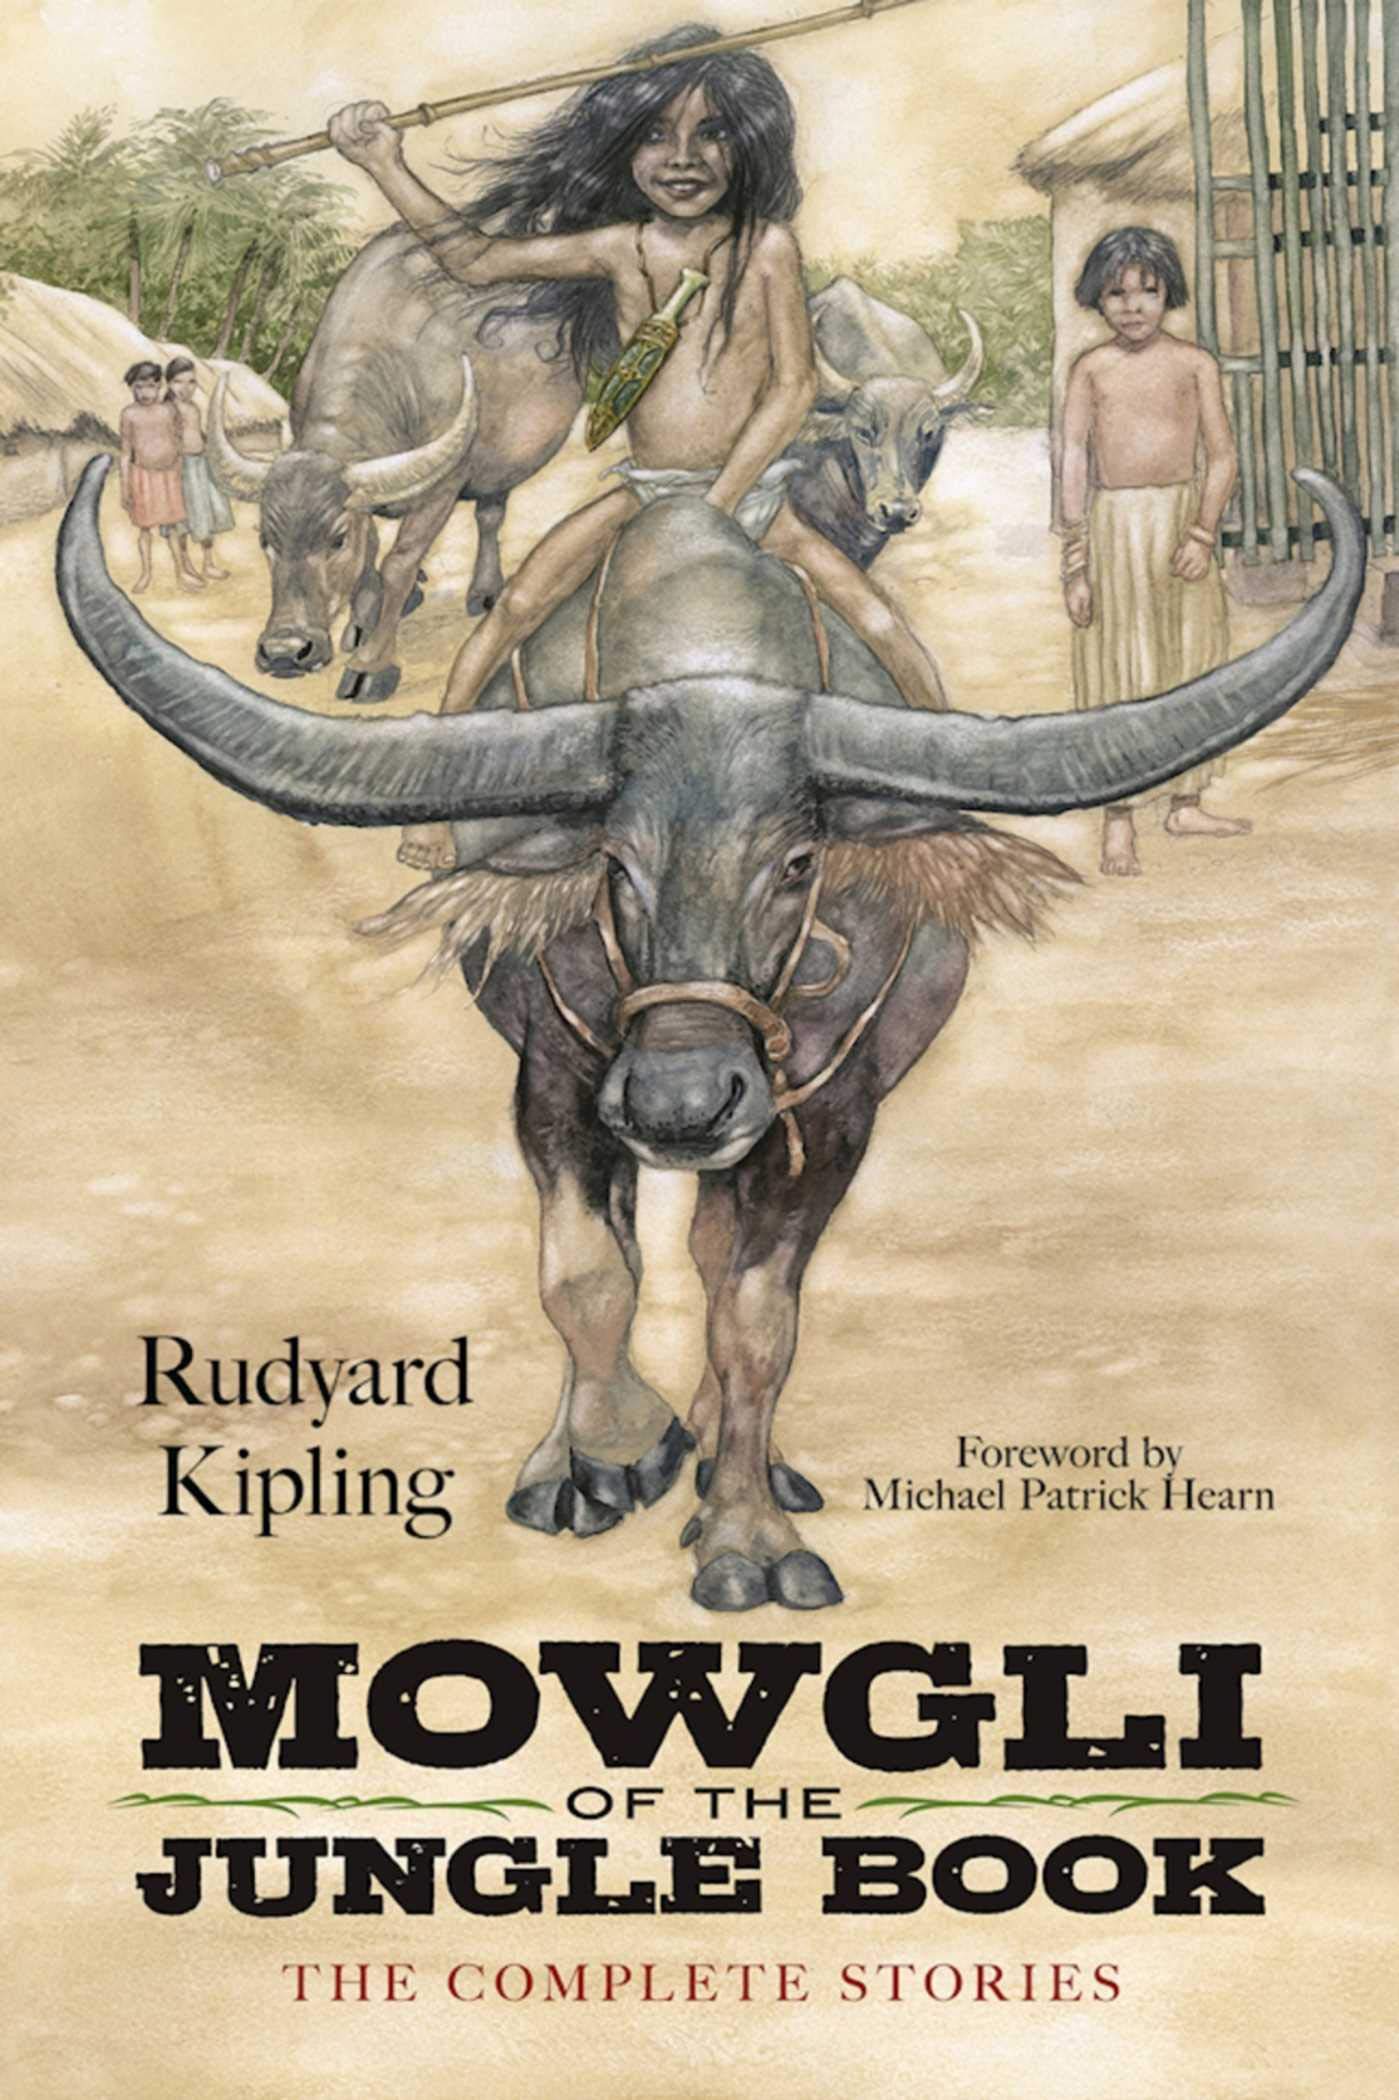 Mowgli of the jungle book : the complete stories